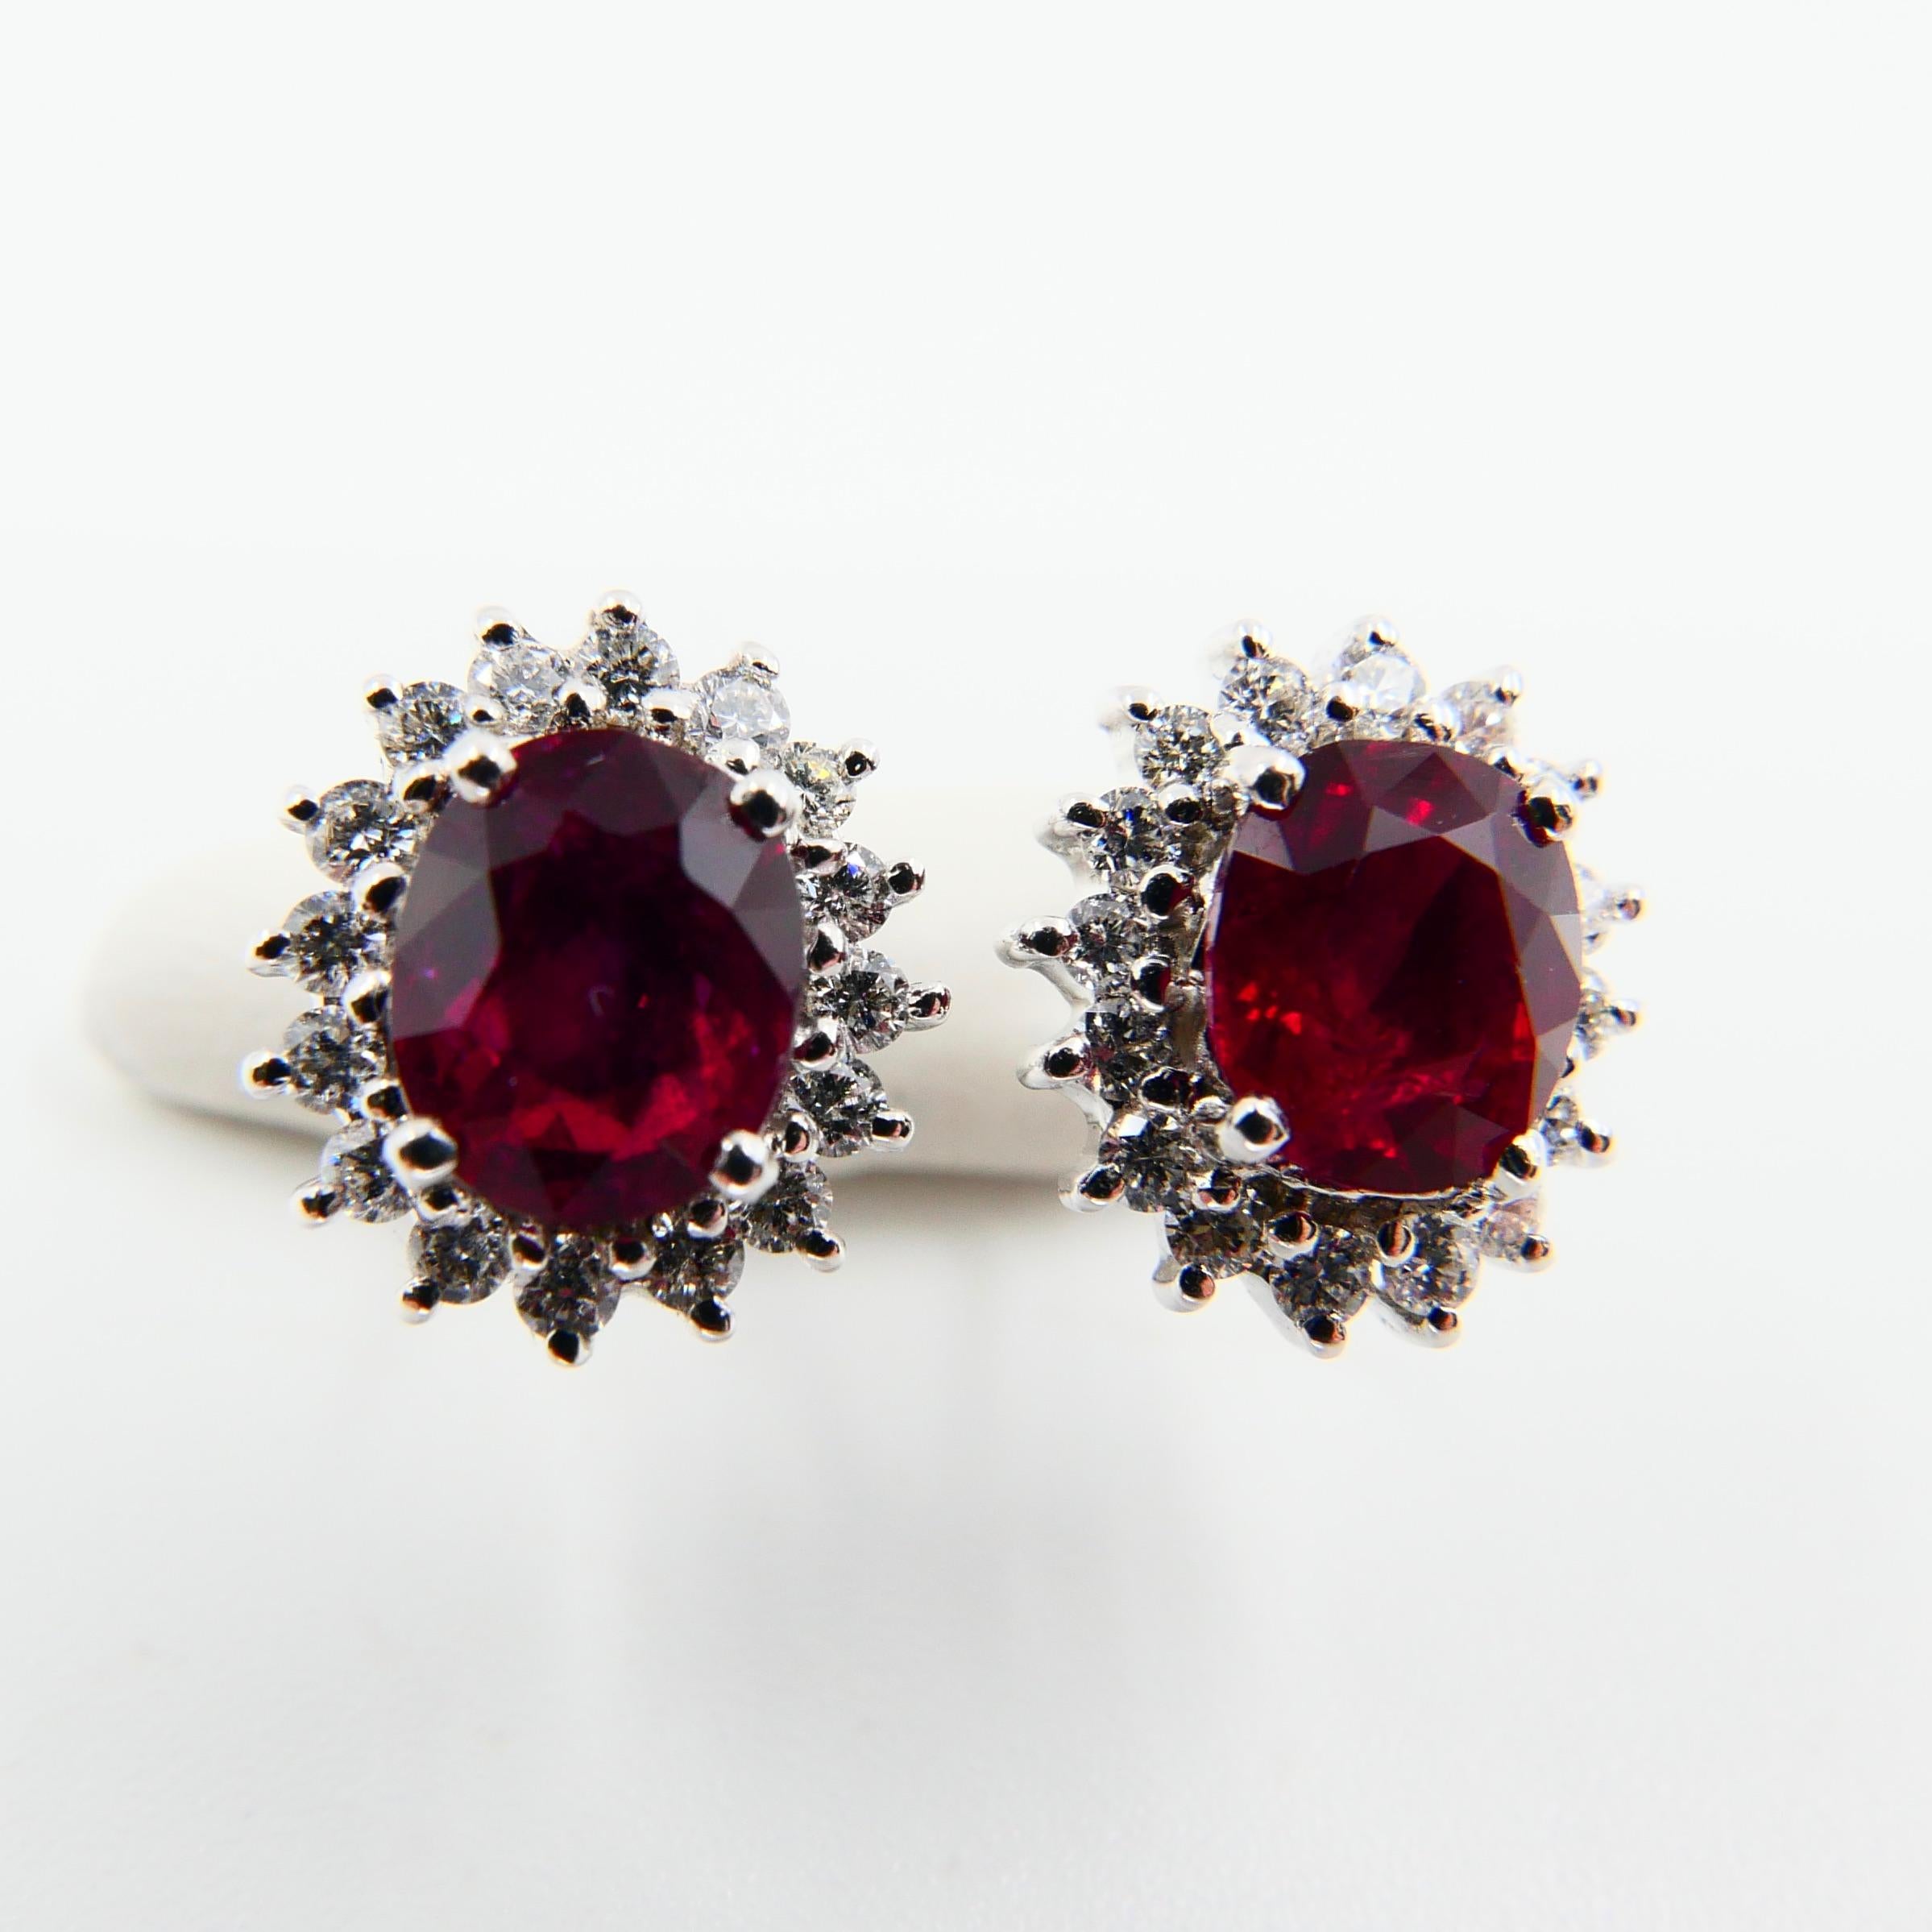 Vivid Red Ruby 2.09 Carat and Diamond Stud Earrings, Close to Pigeon Blood Red 1